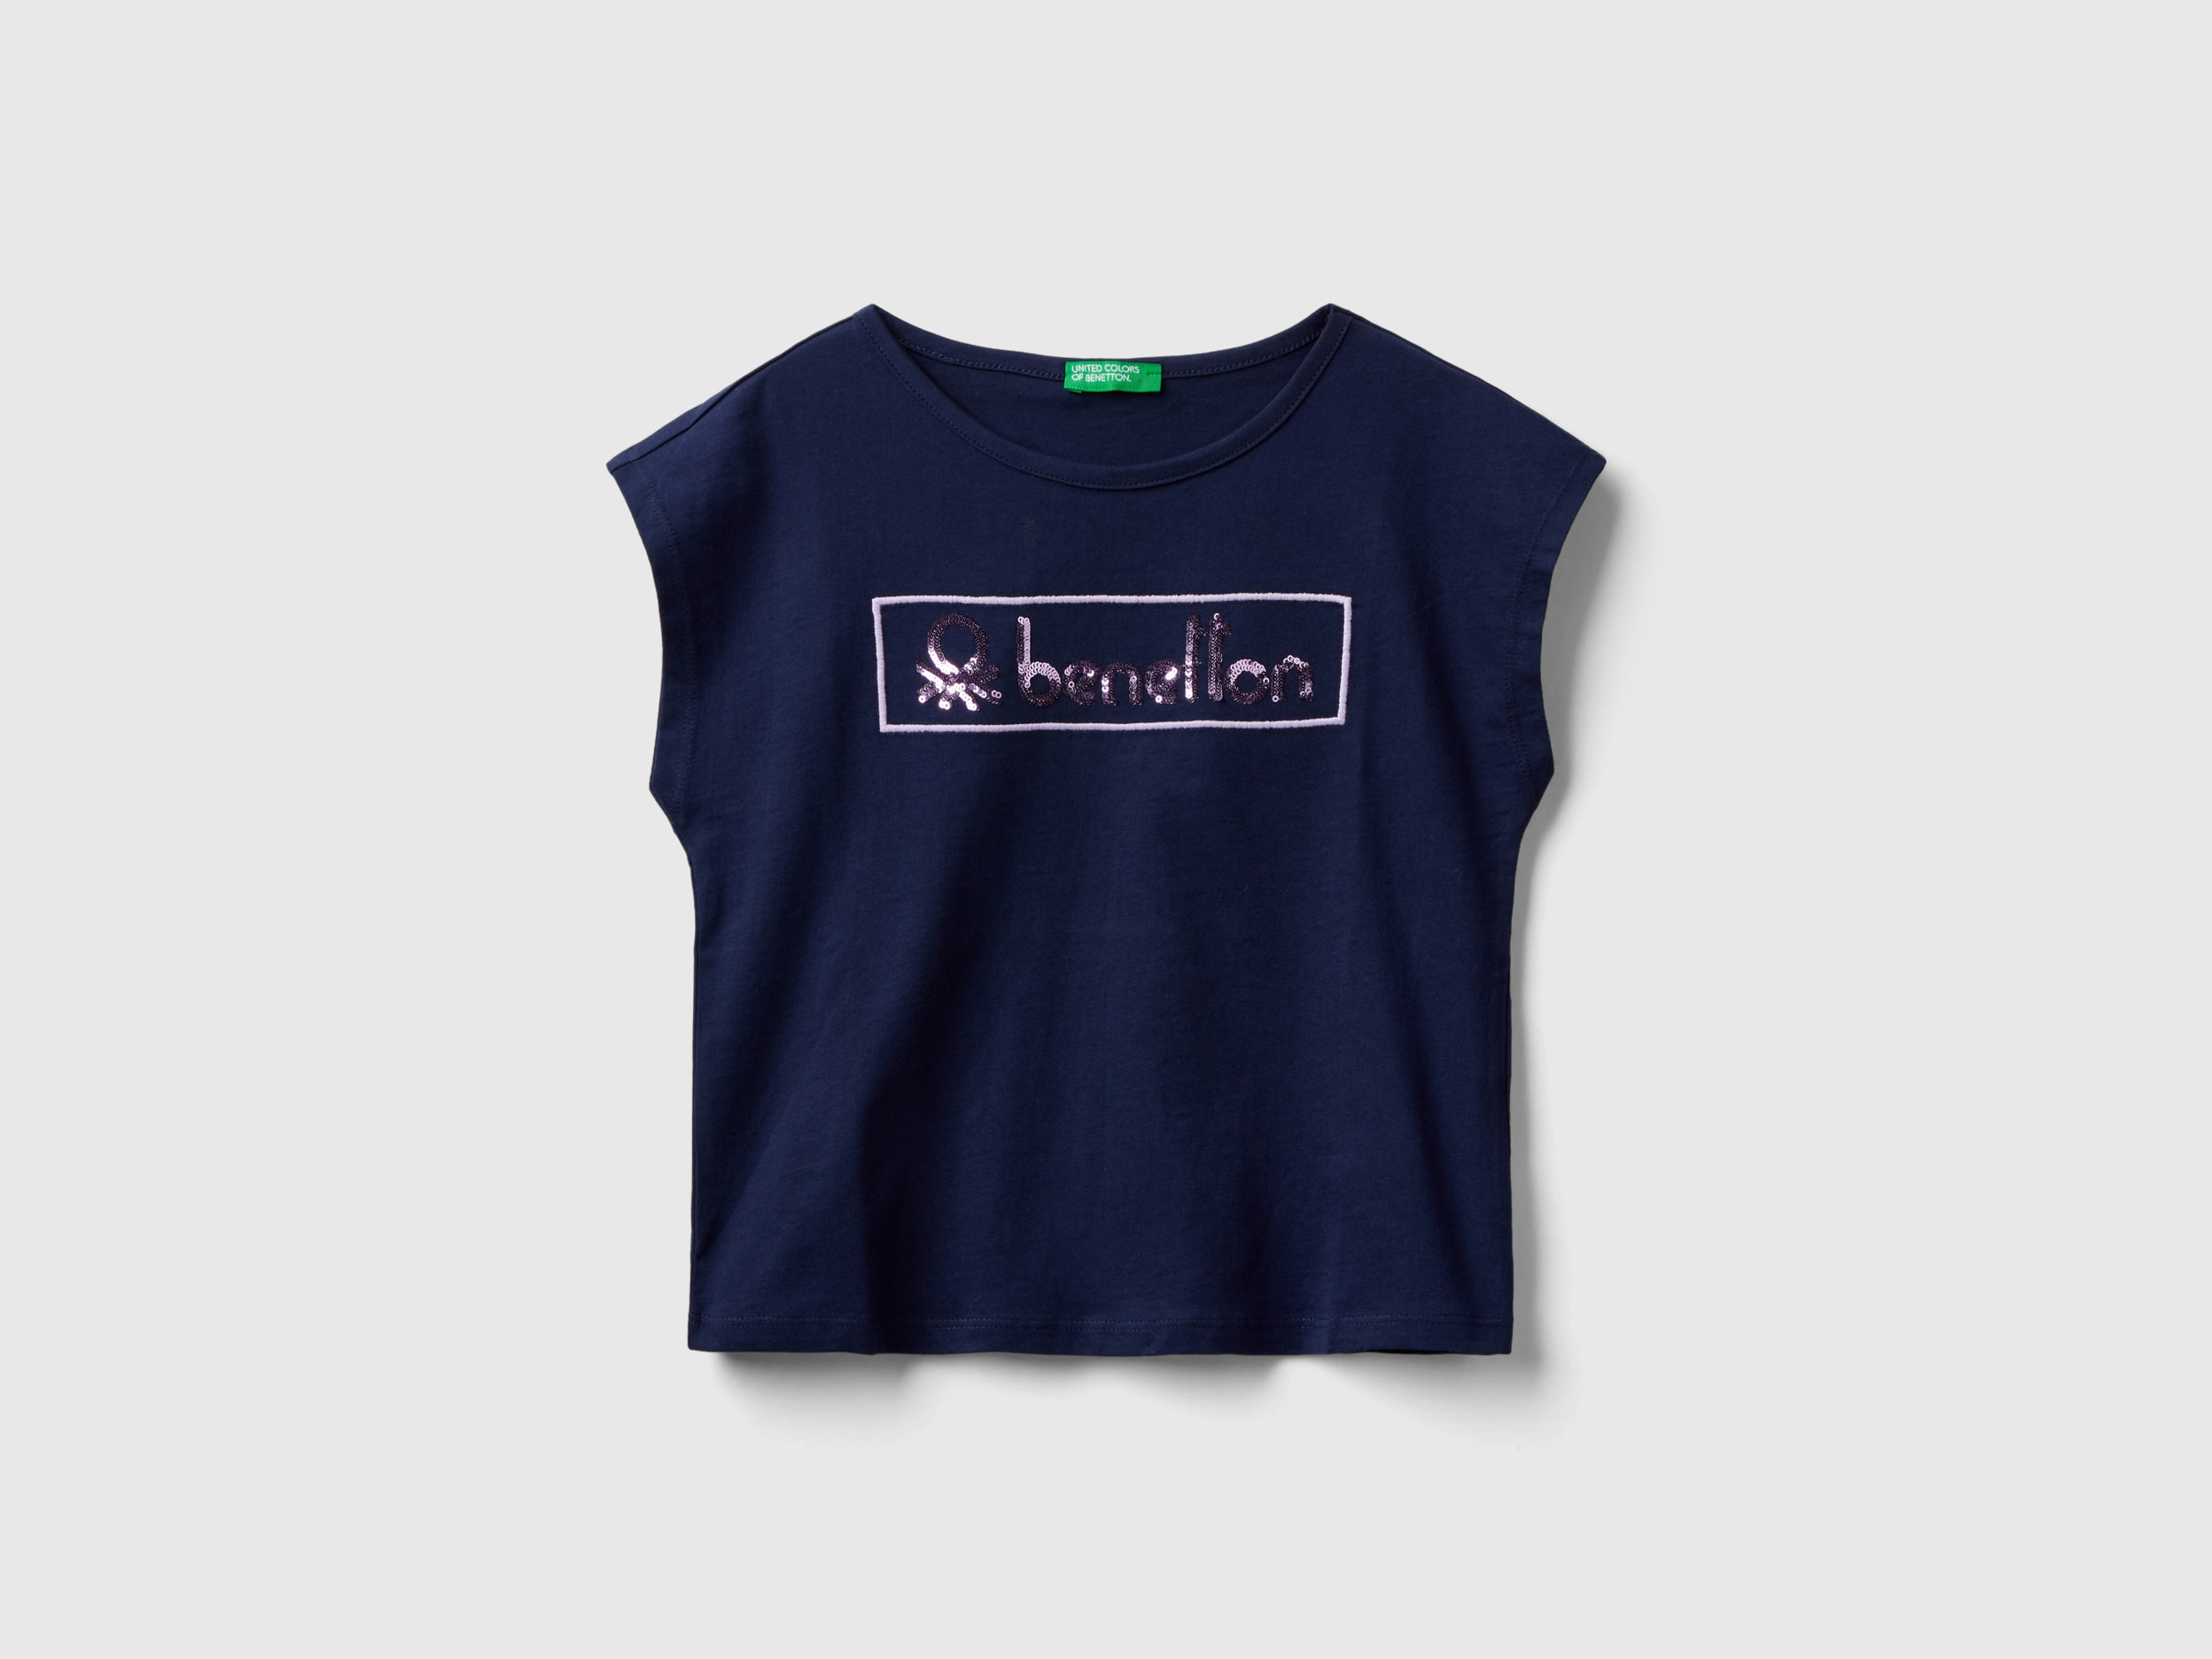 Image of Benetton, T-shirt With Sequins, size S, Dark Blue, Kids